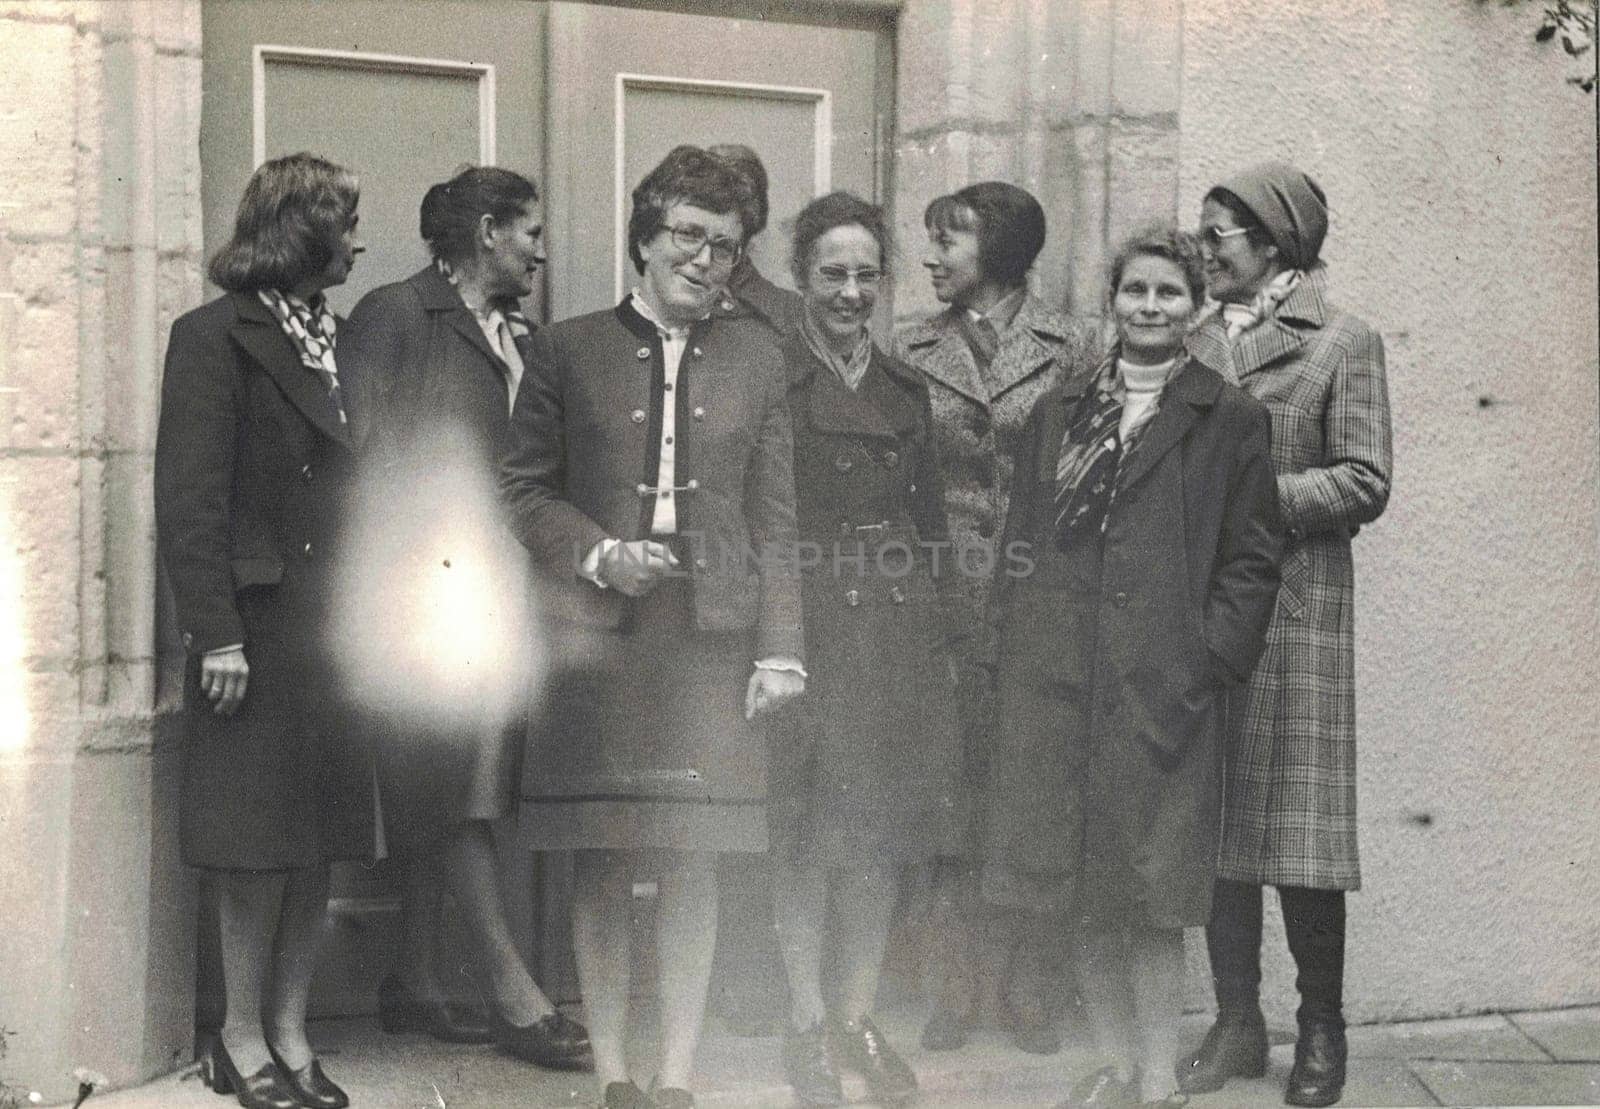 GERMANY - CIRCA 1960s: Retro photo shows group of ladies pose in front of building. Photo has imperfection.